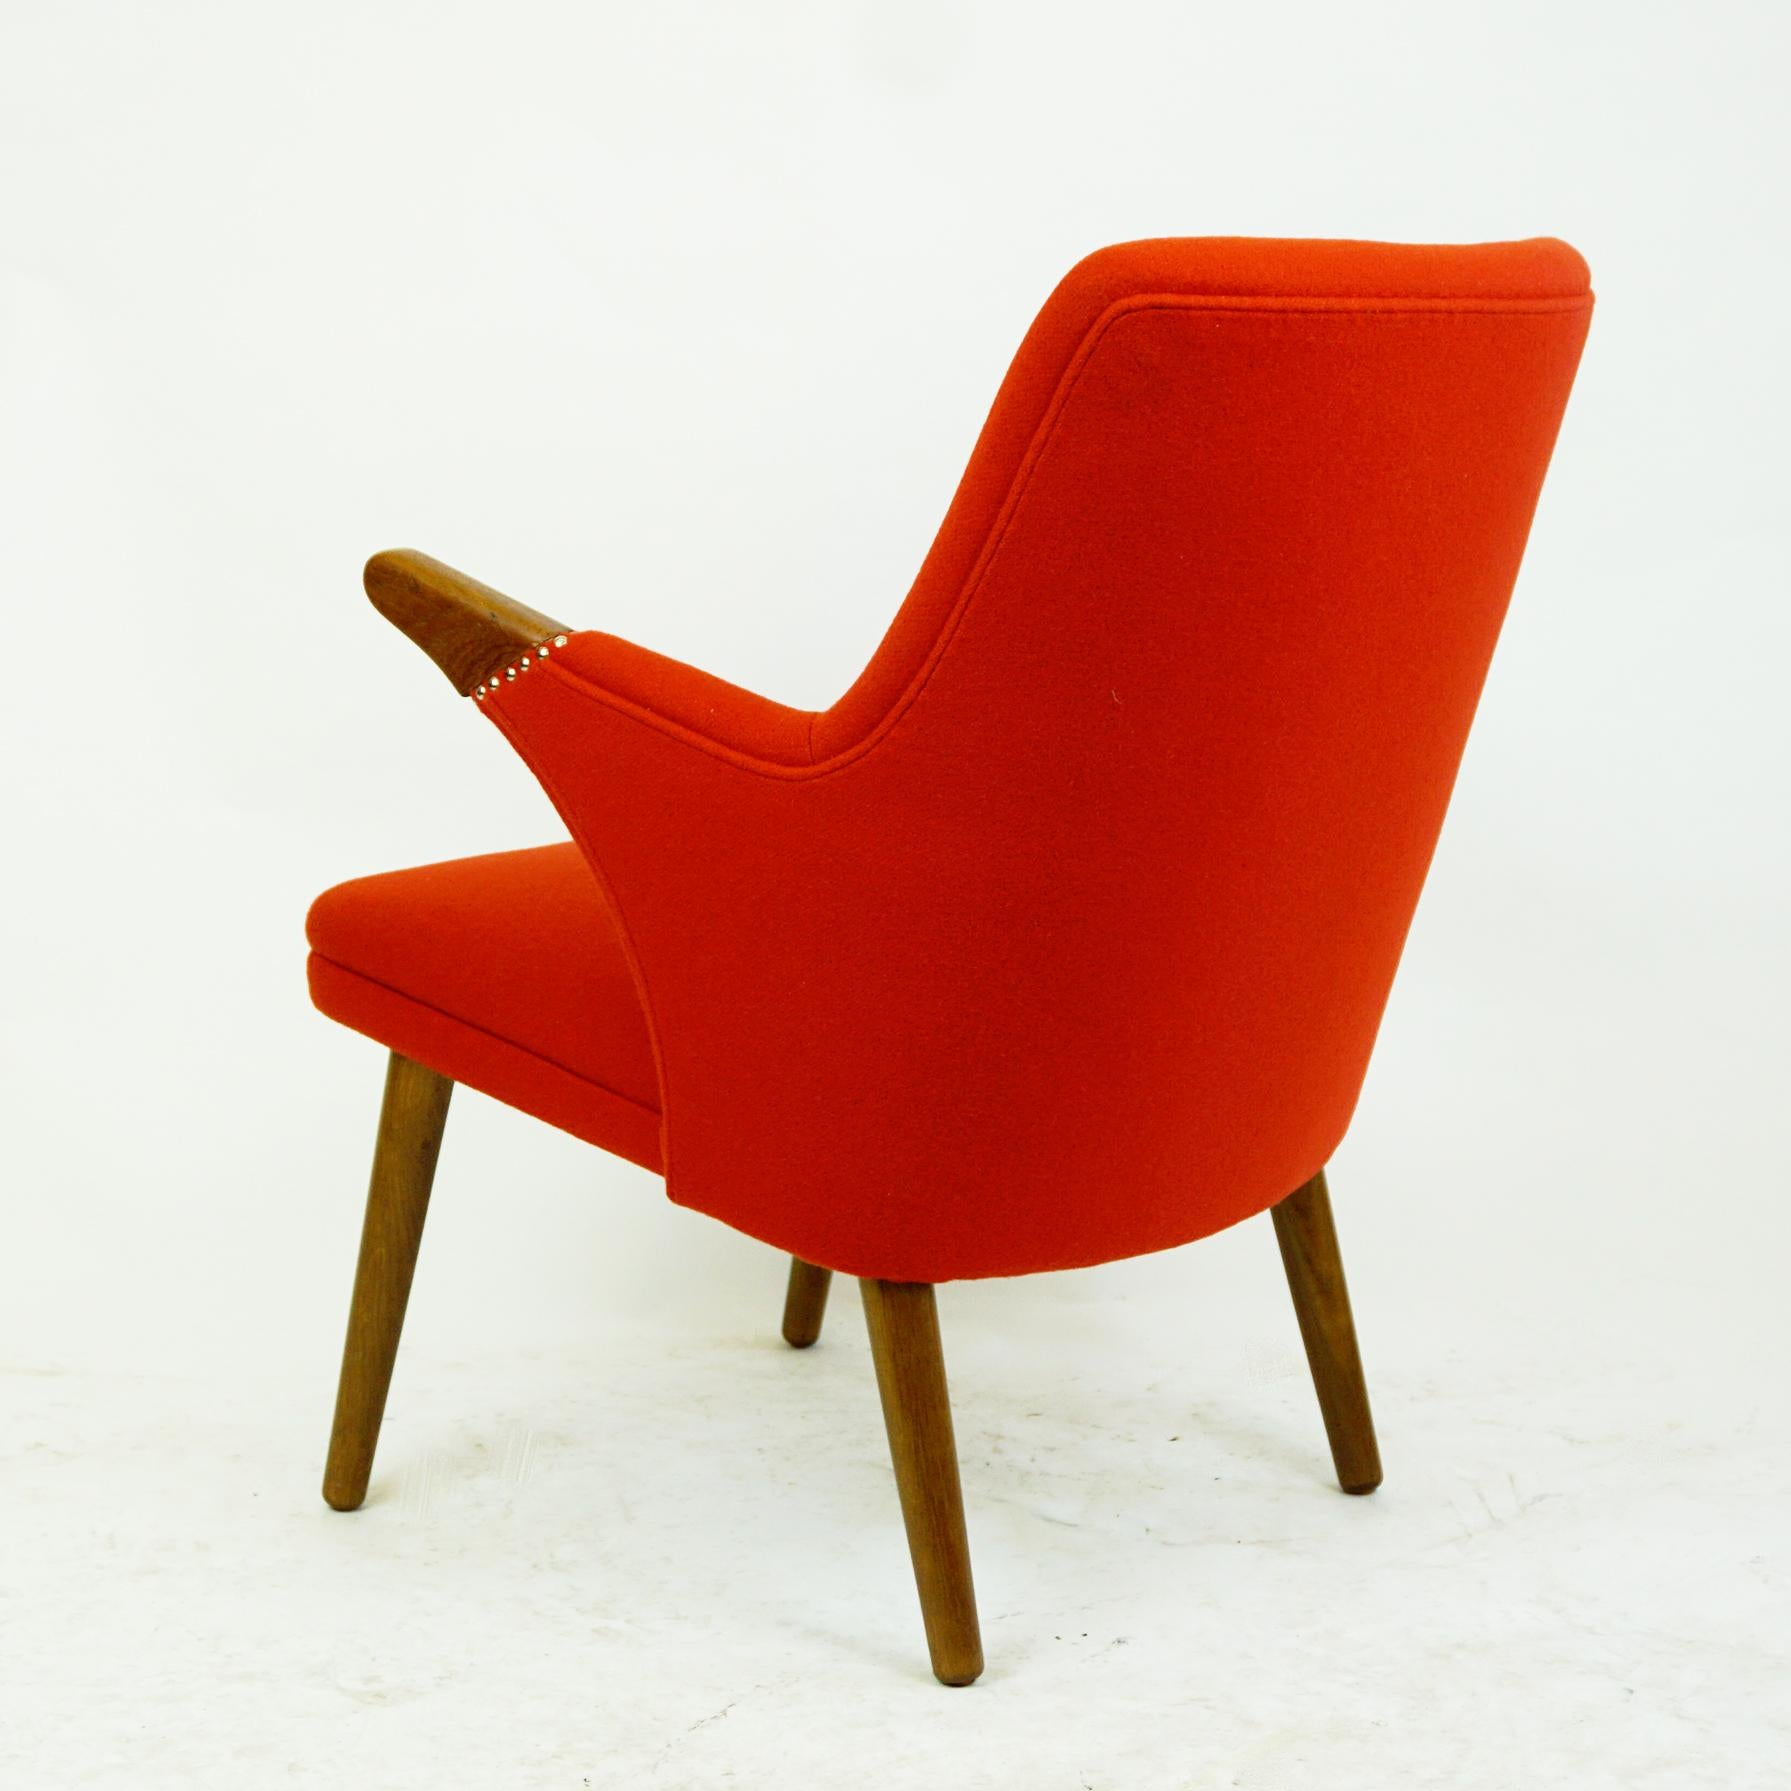 Mid-20th Century Scandinavian Svend Skipper Mini Bear Teak Lounge Chair with New Red Fabric For Sale